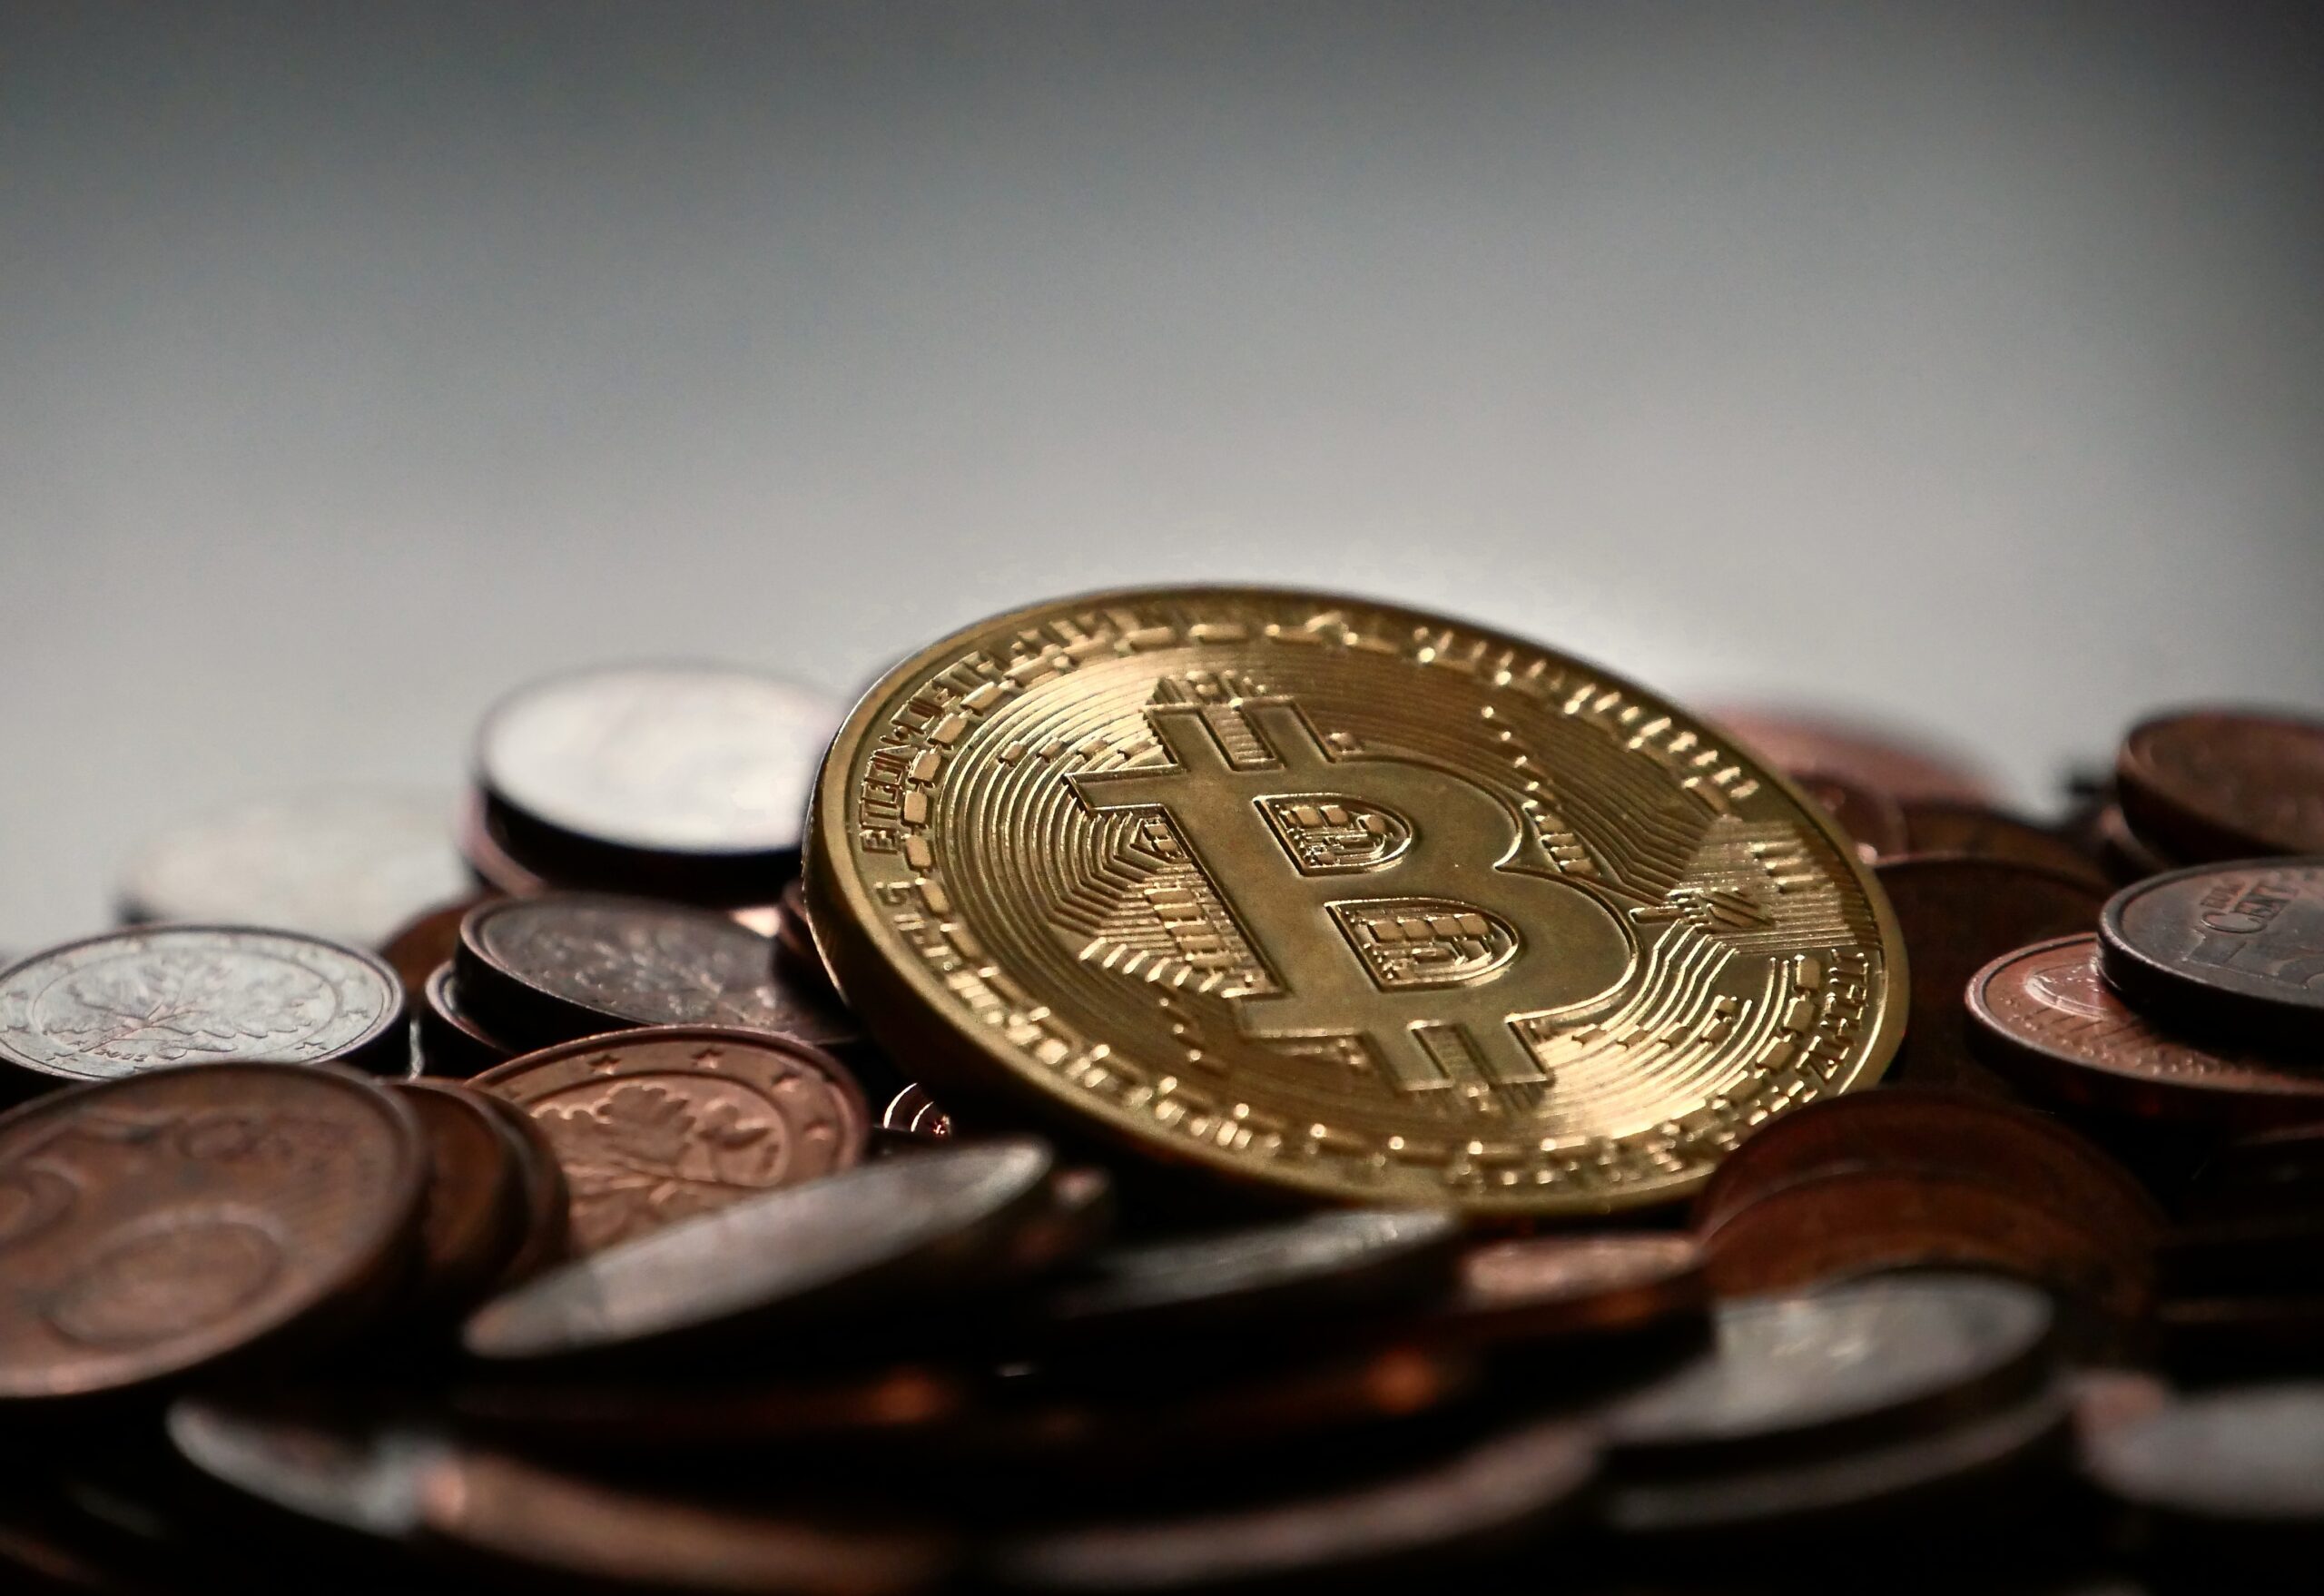 Geek insider, geekinsider, geekinsider. Com,, 5 reasons why bitcoin payments are becoming more popular, crypto currency